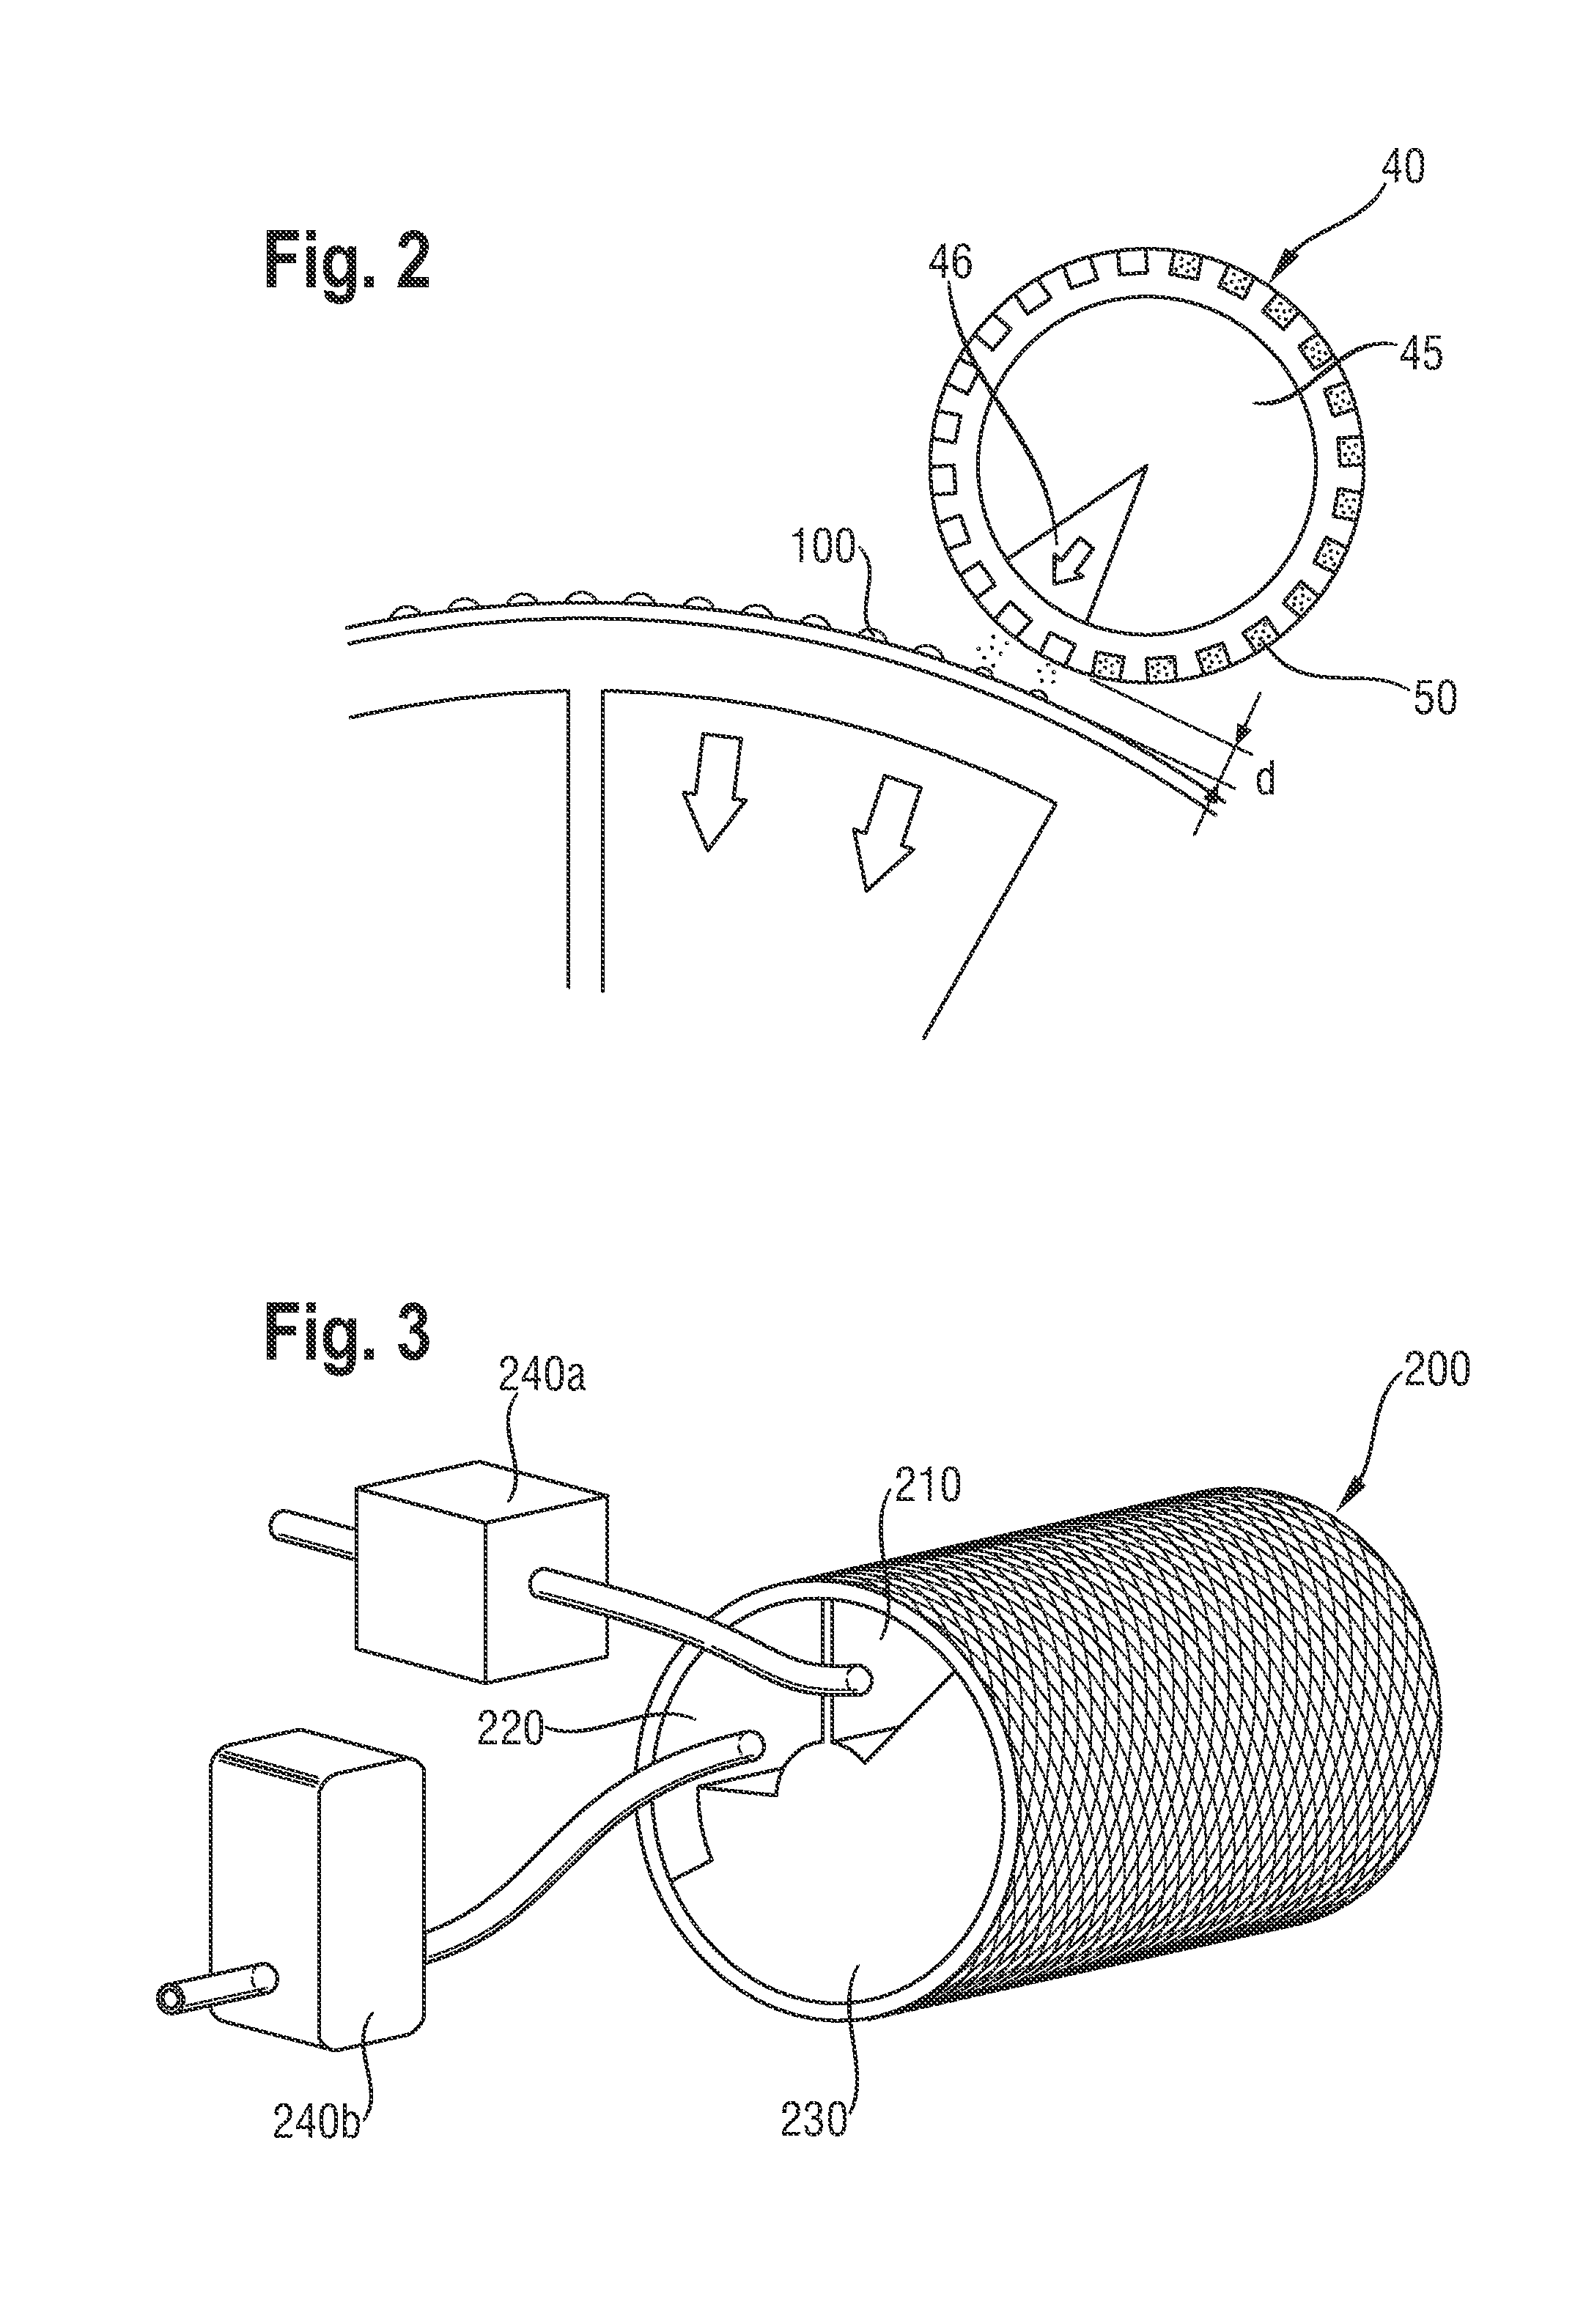 Apparatus and process for transferring substrate material and particulate material